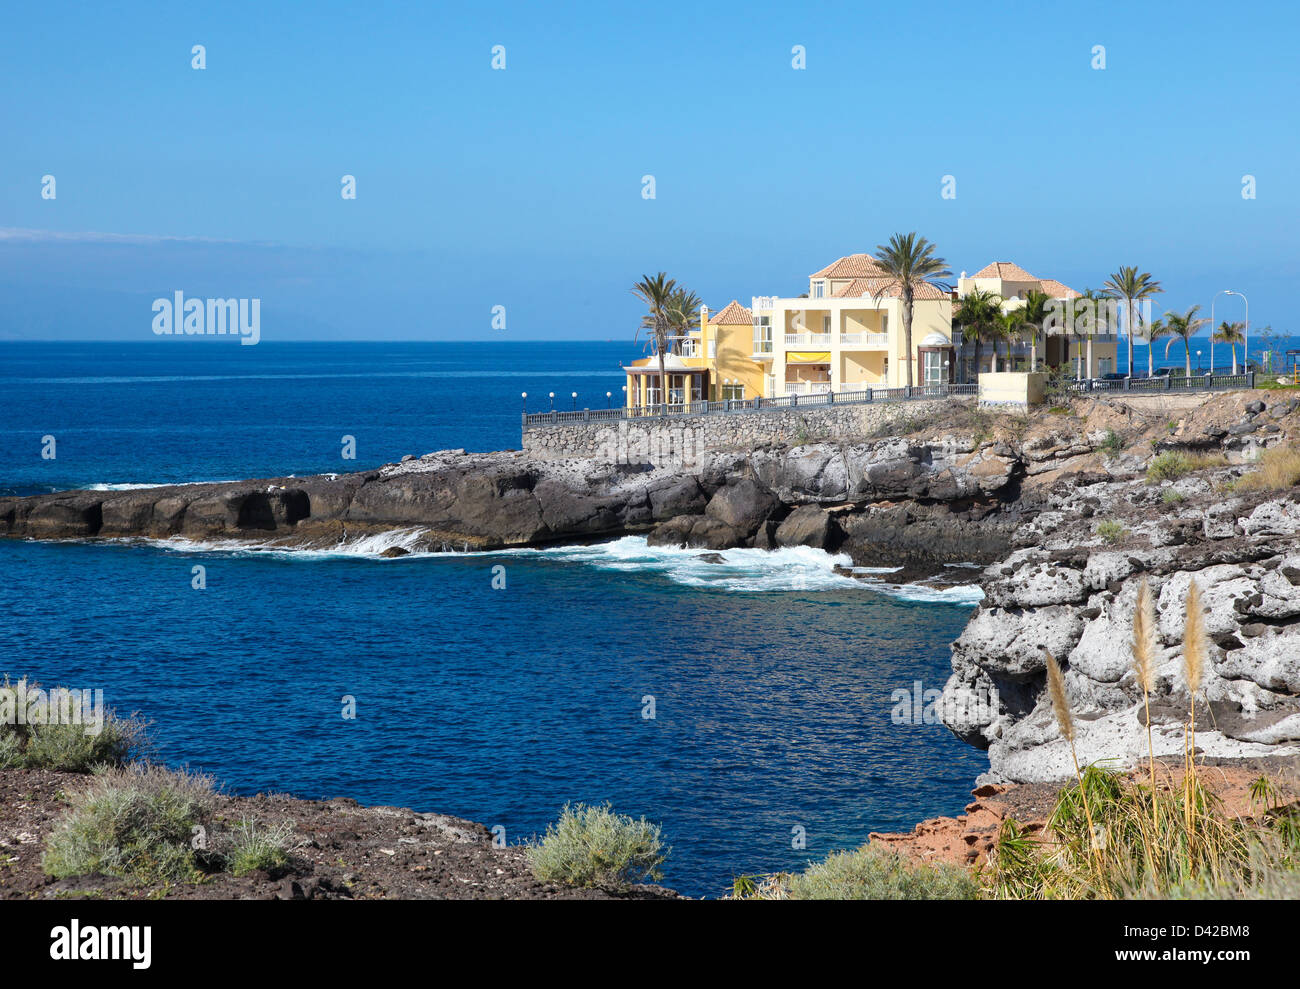 Colorful holiday resorts at Costa Adeje in Tenerife, Canary Islands, Spain. Stock Photo